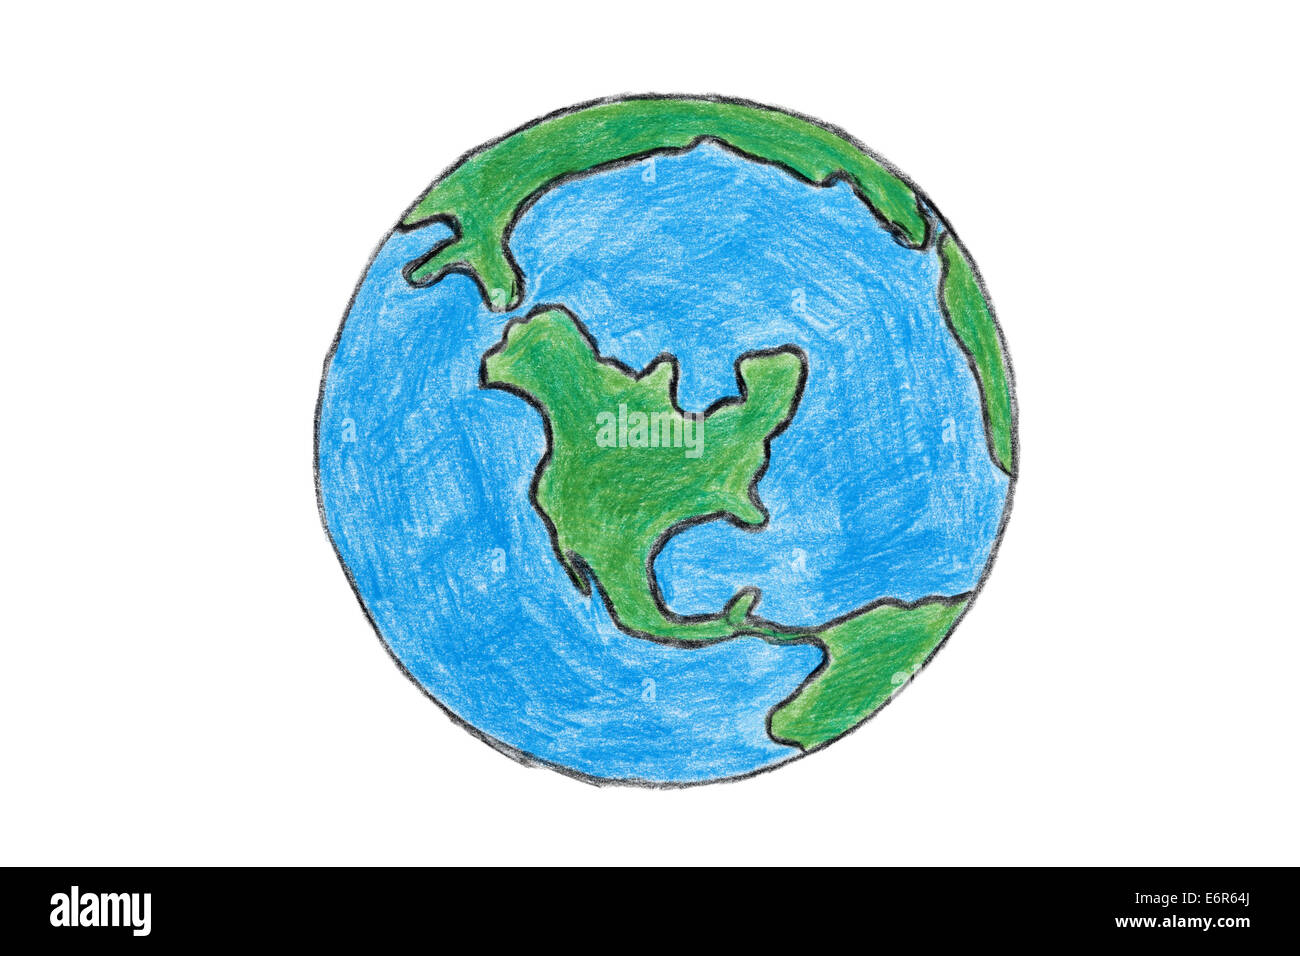 Earth handdrawn with colored pencils. Isolated On White. Image was